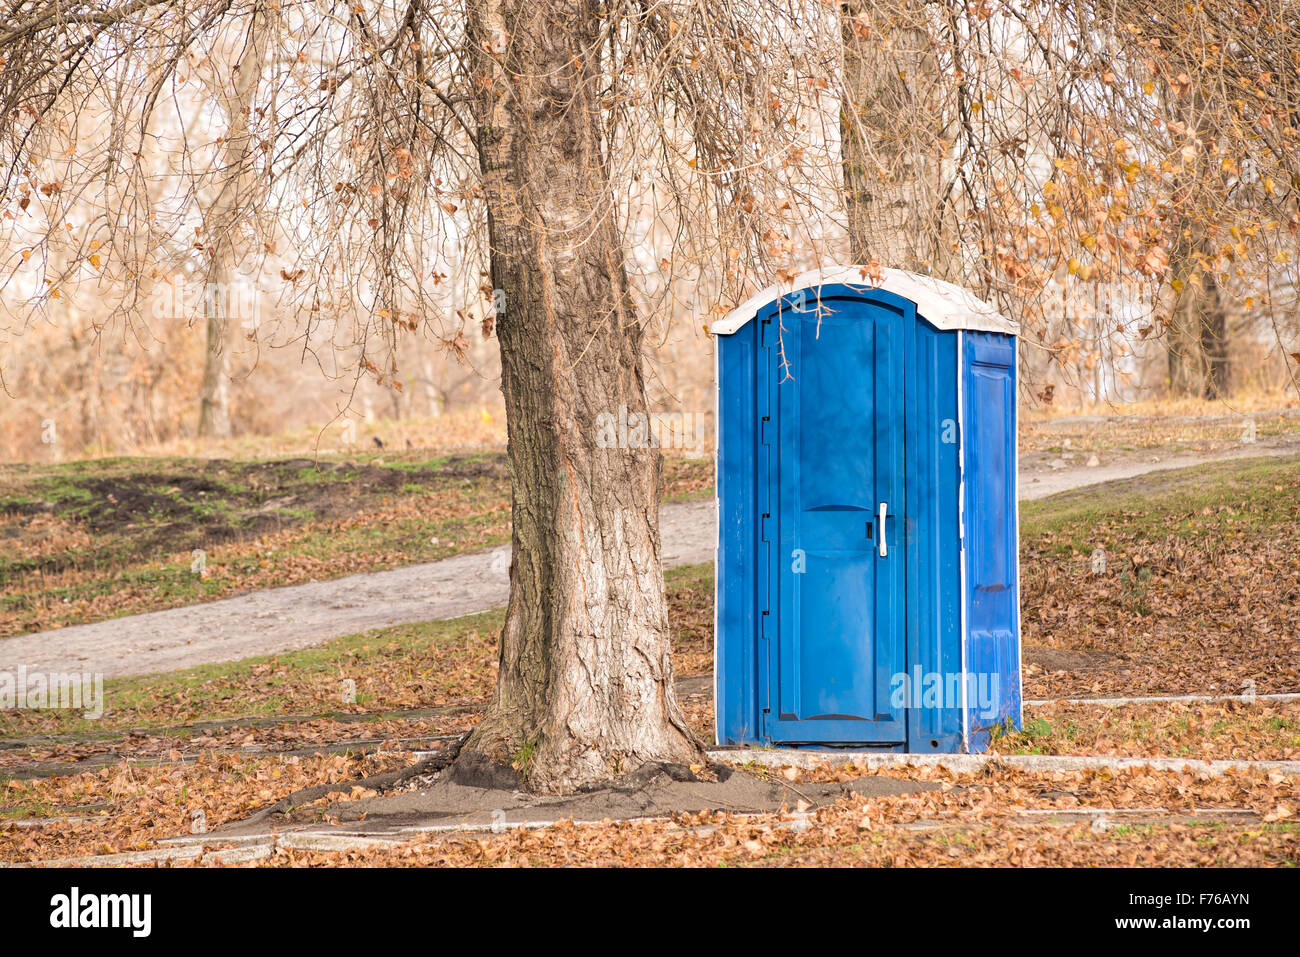 Blue outdoor chemical toilet in the park in winter Stock Photo